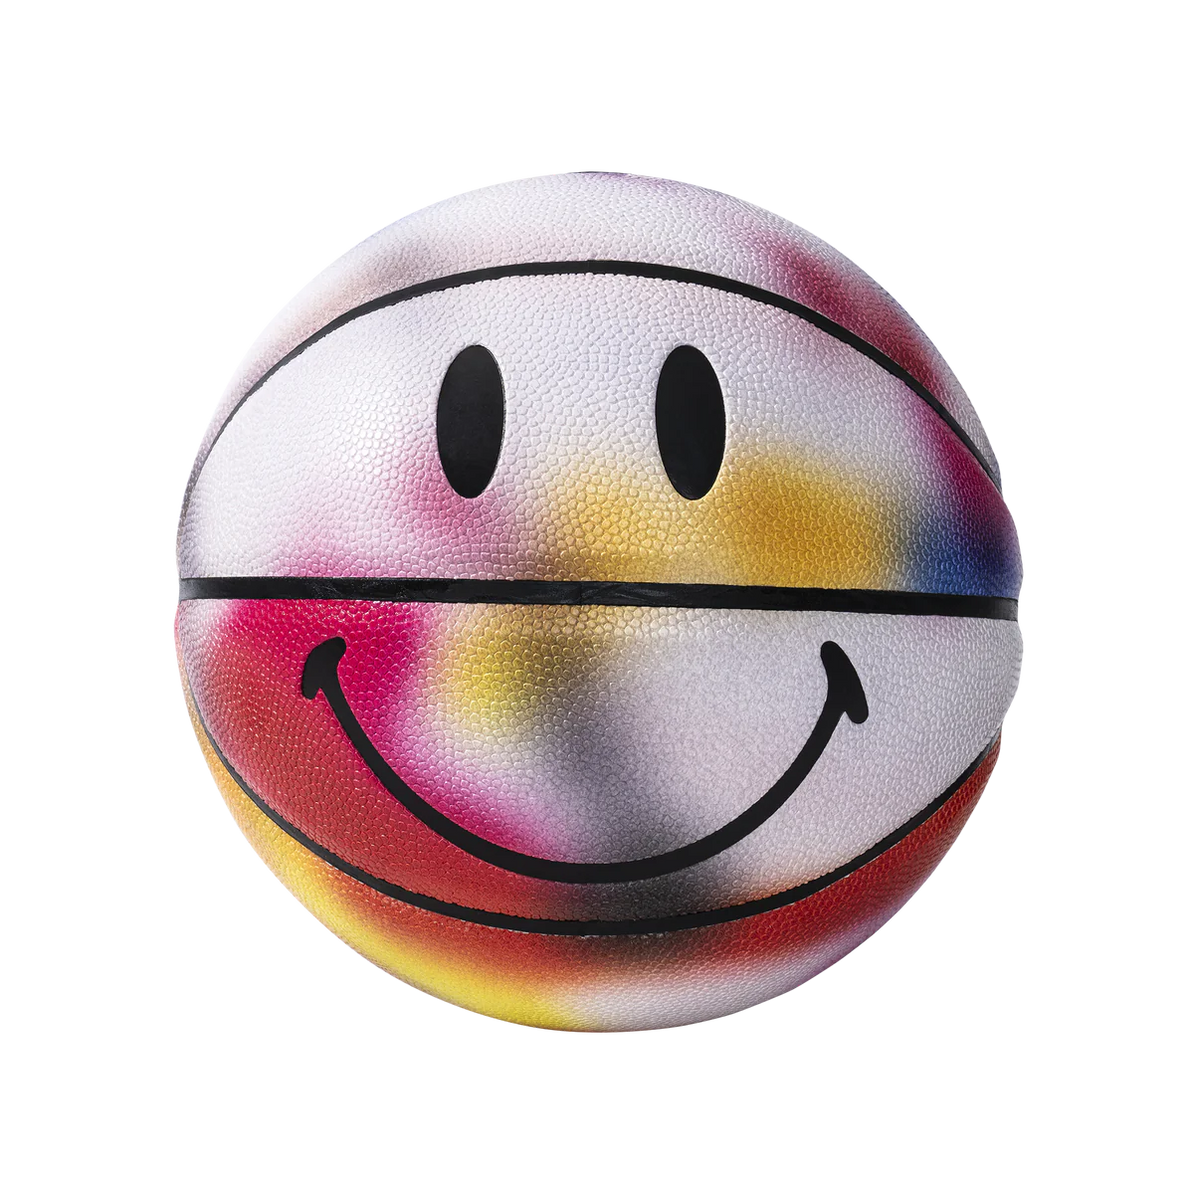 SMILEY NEAR SIGHTED BASKETBALL - MULTICOLOR PATTERN